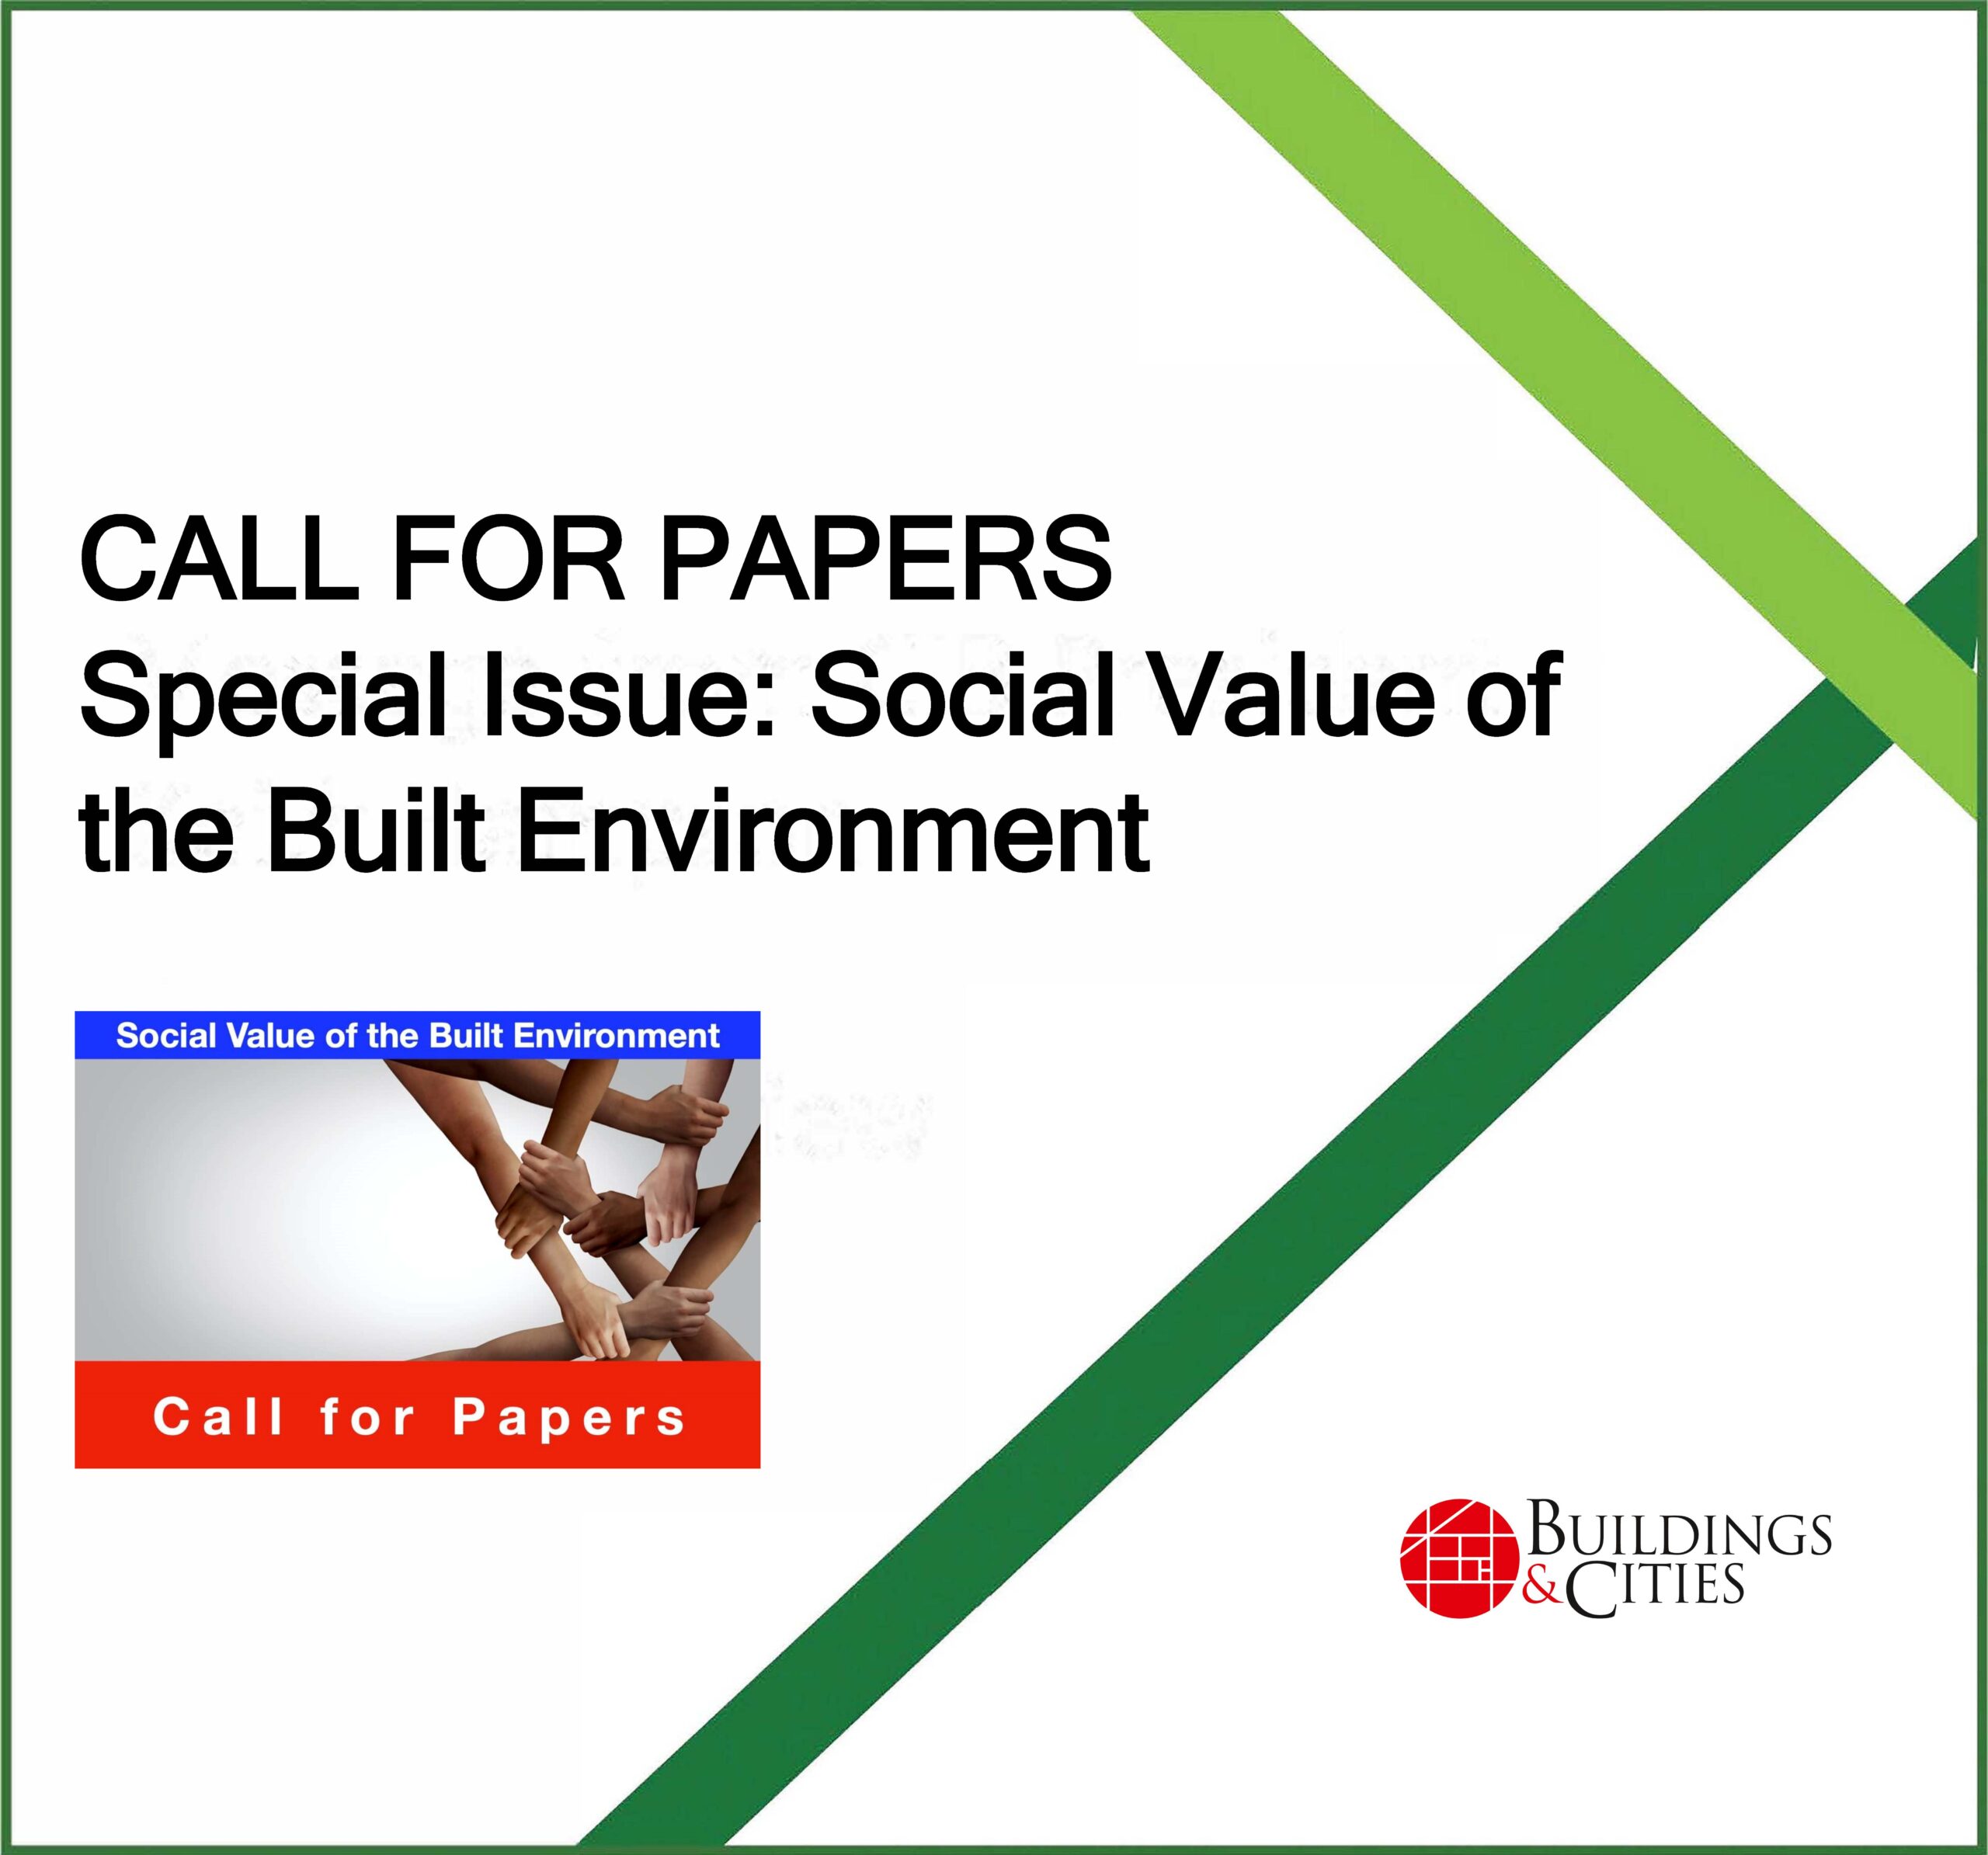 CALL FOR PAPERS – Special Issue: Social Value of the Built Environment